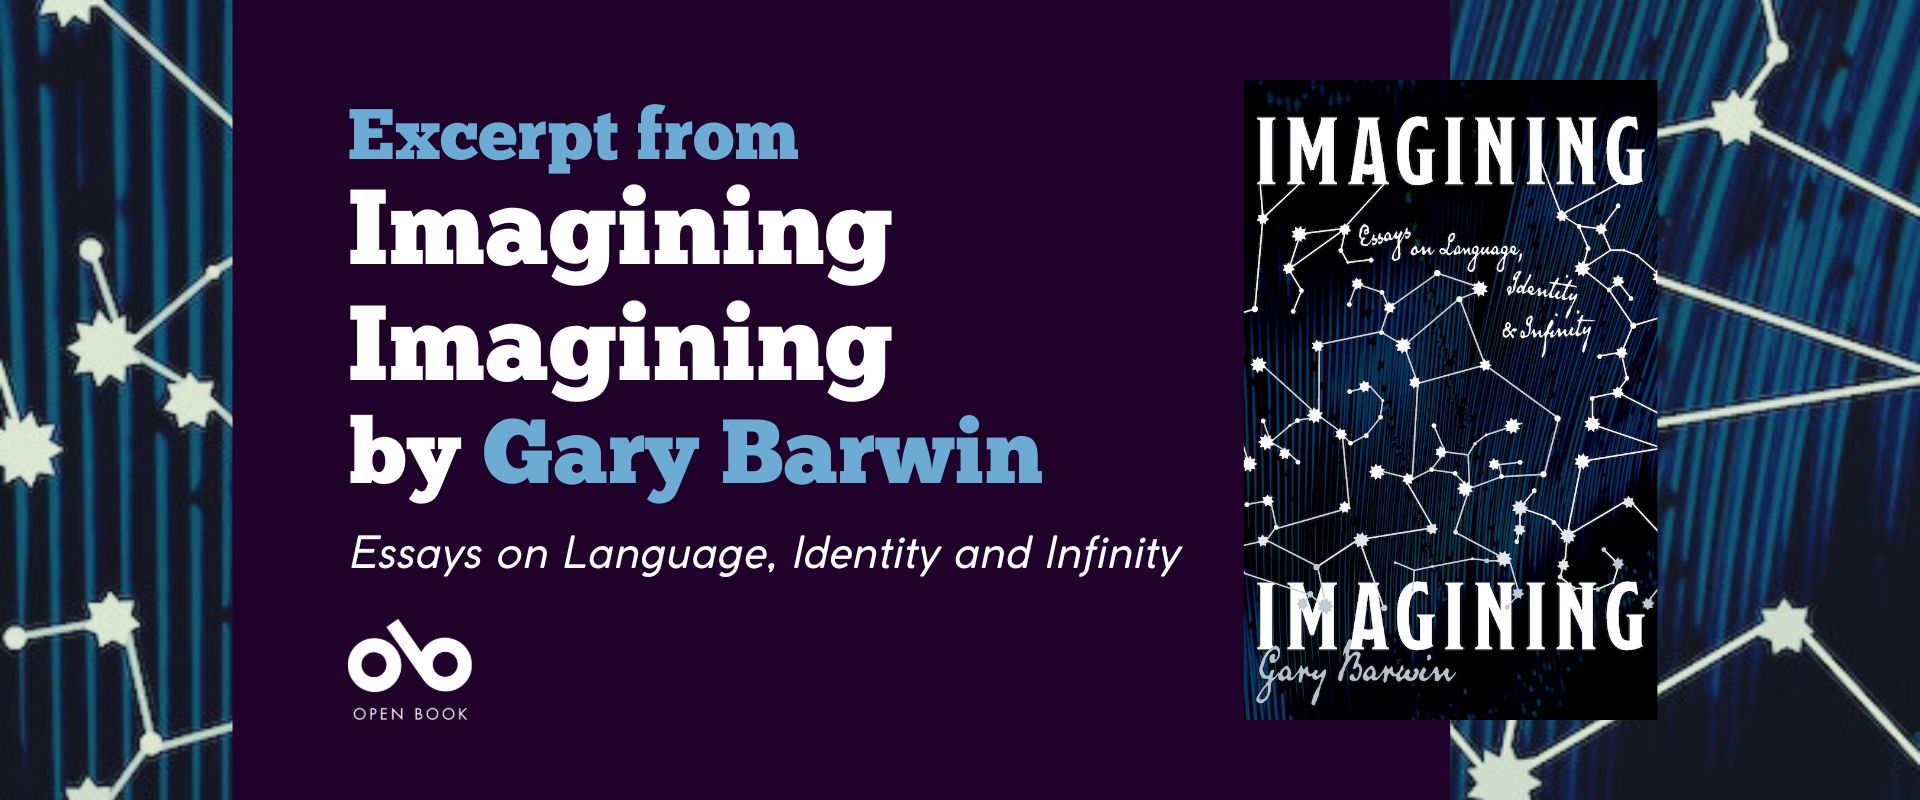 Banner image with text reading Excerpt from Imagining Imagining by Gary Barwin, essays on Language, Identity, and Infinity. Open Book logo bottom left. Image of the book cover on the right. Background taken from the book cover, composed of an illustration of constellations.